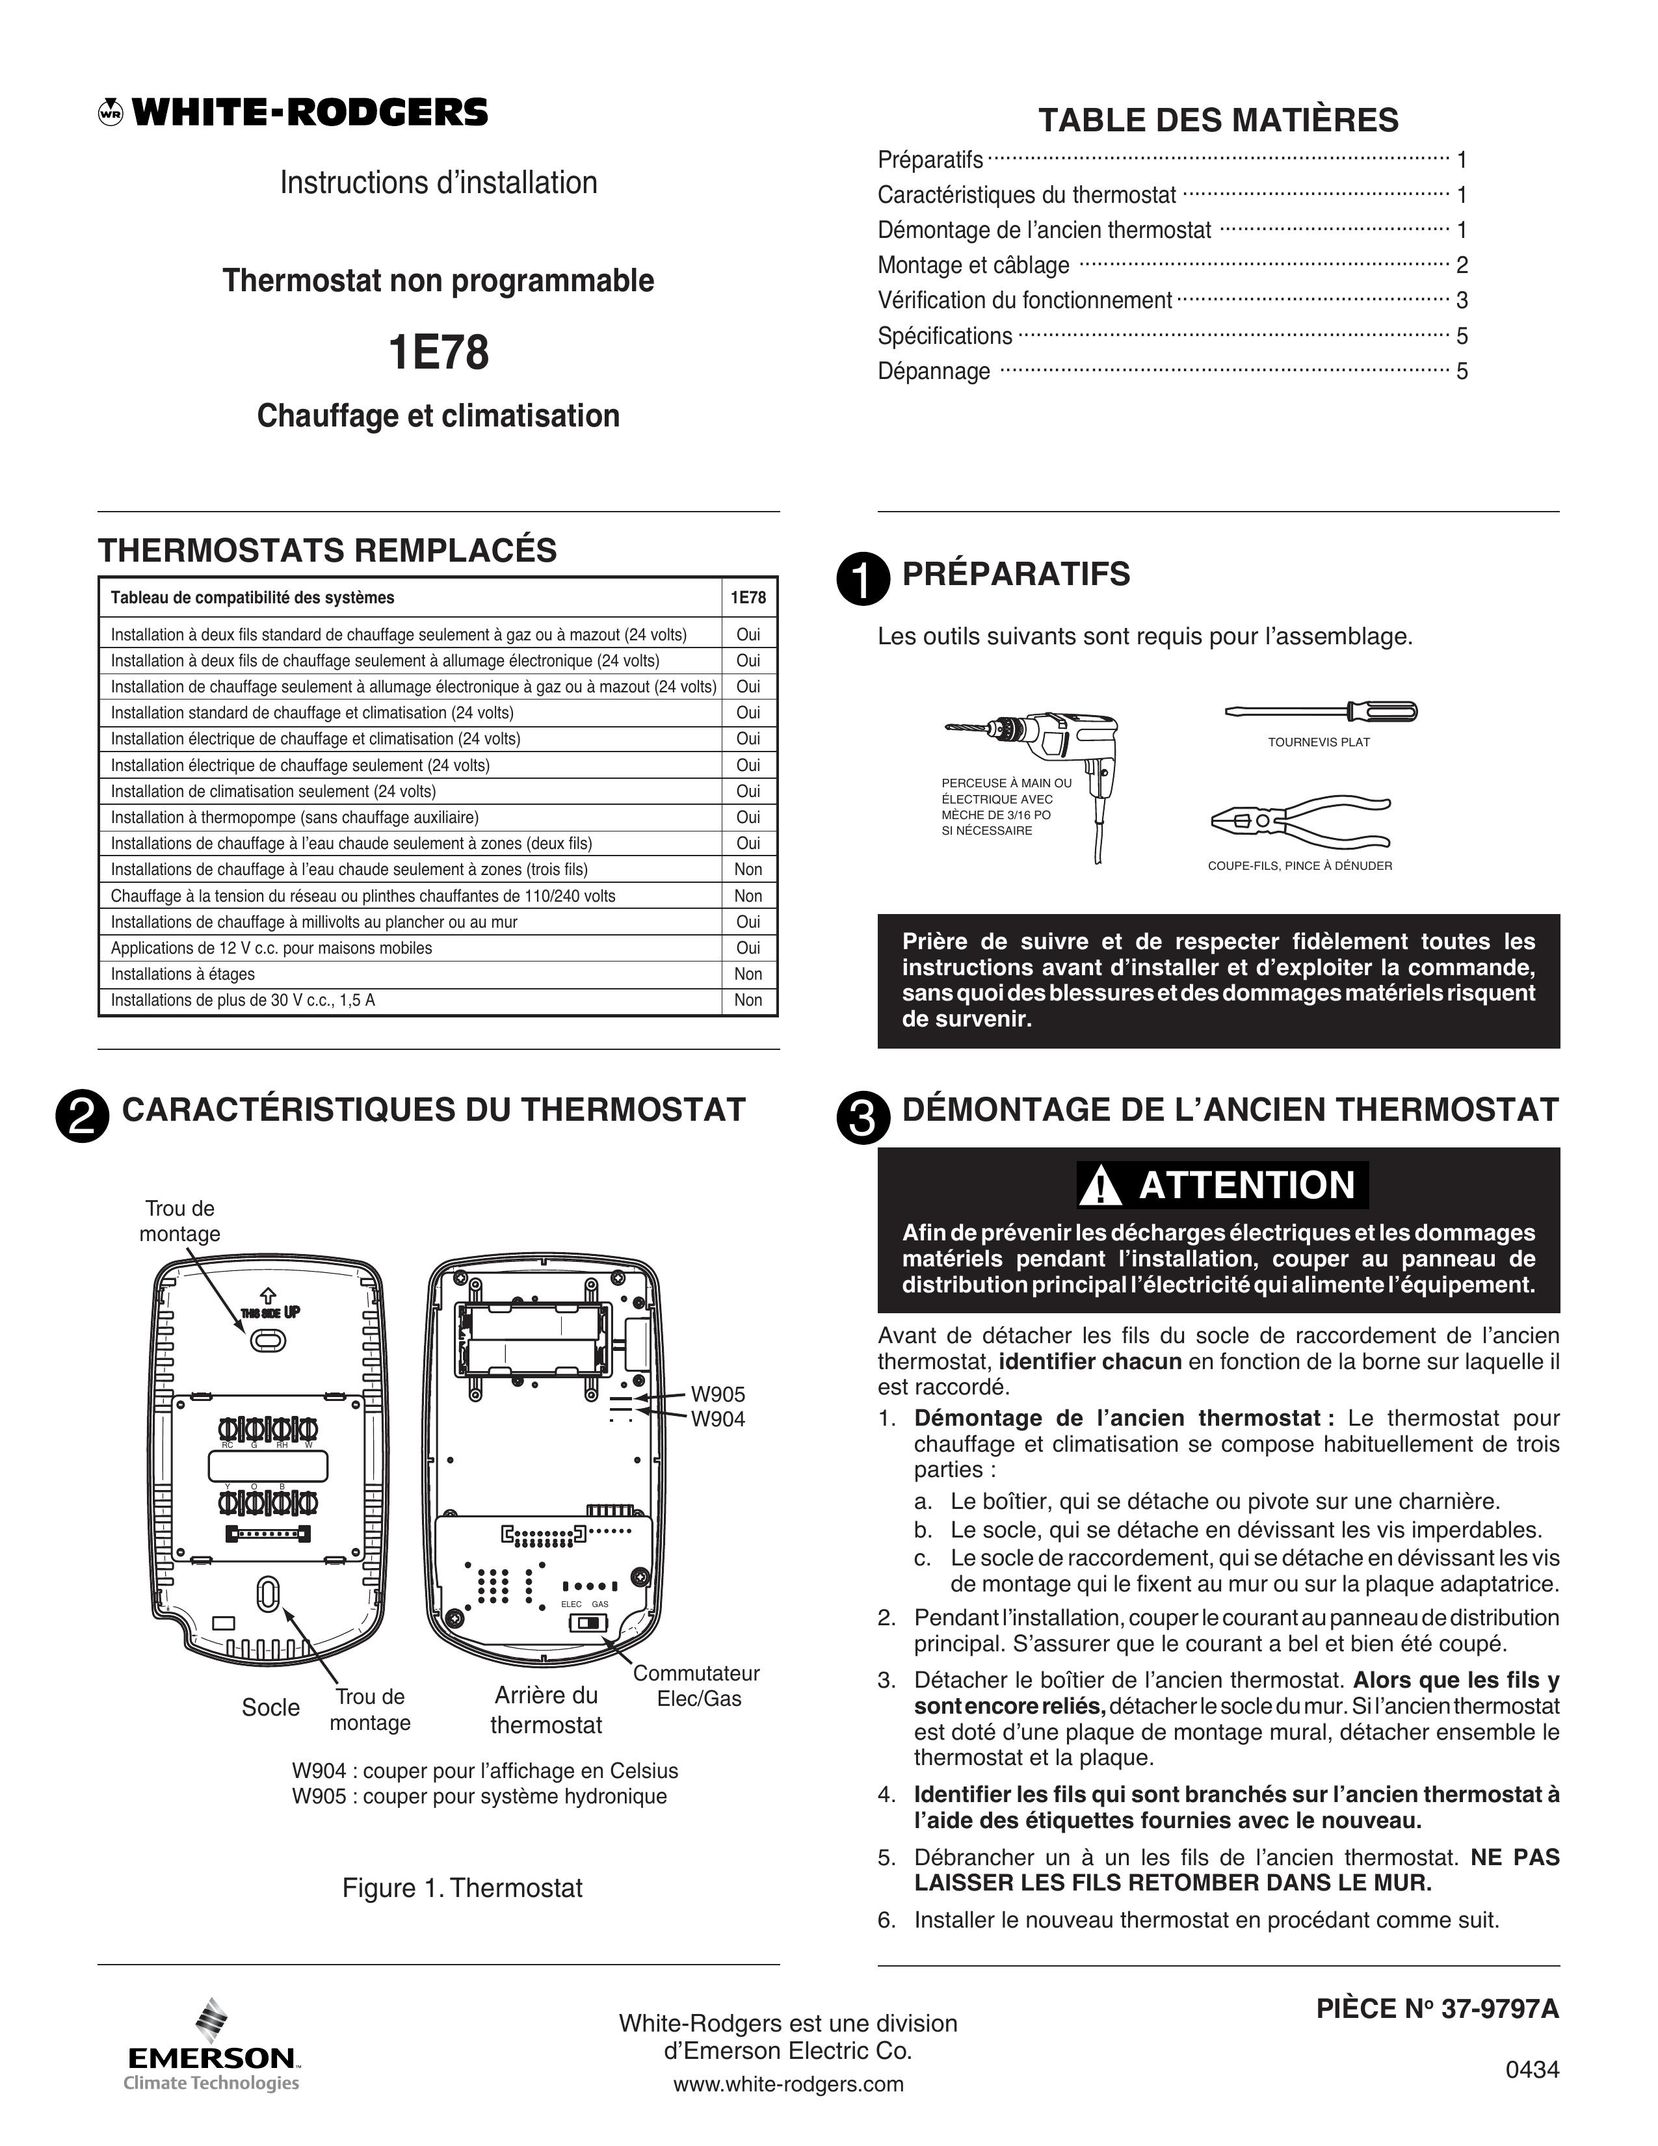 White Rodgers 1.00E+78 Thermostat User Manual